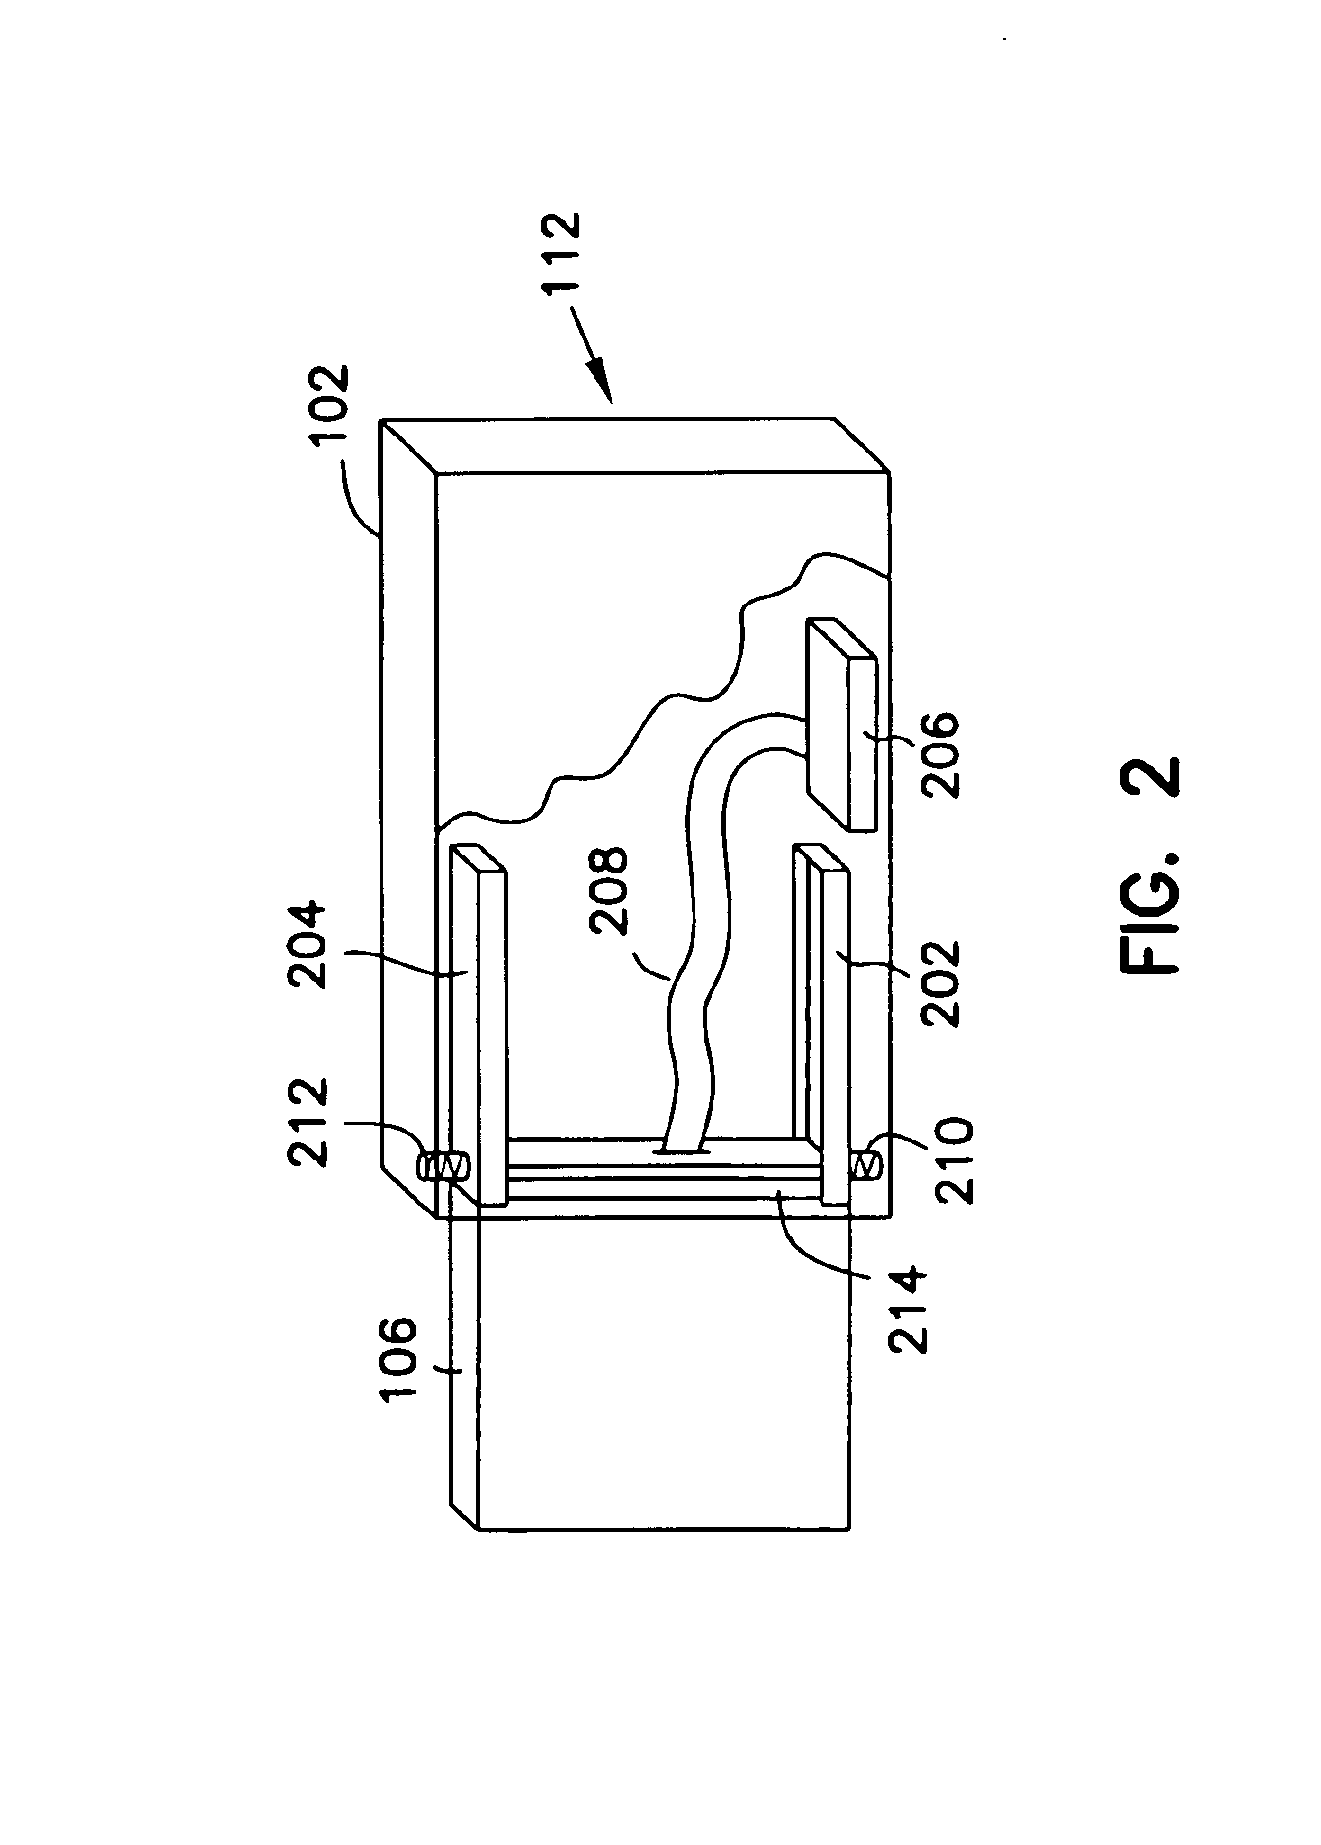 Method and apparatus having multiple display devices